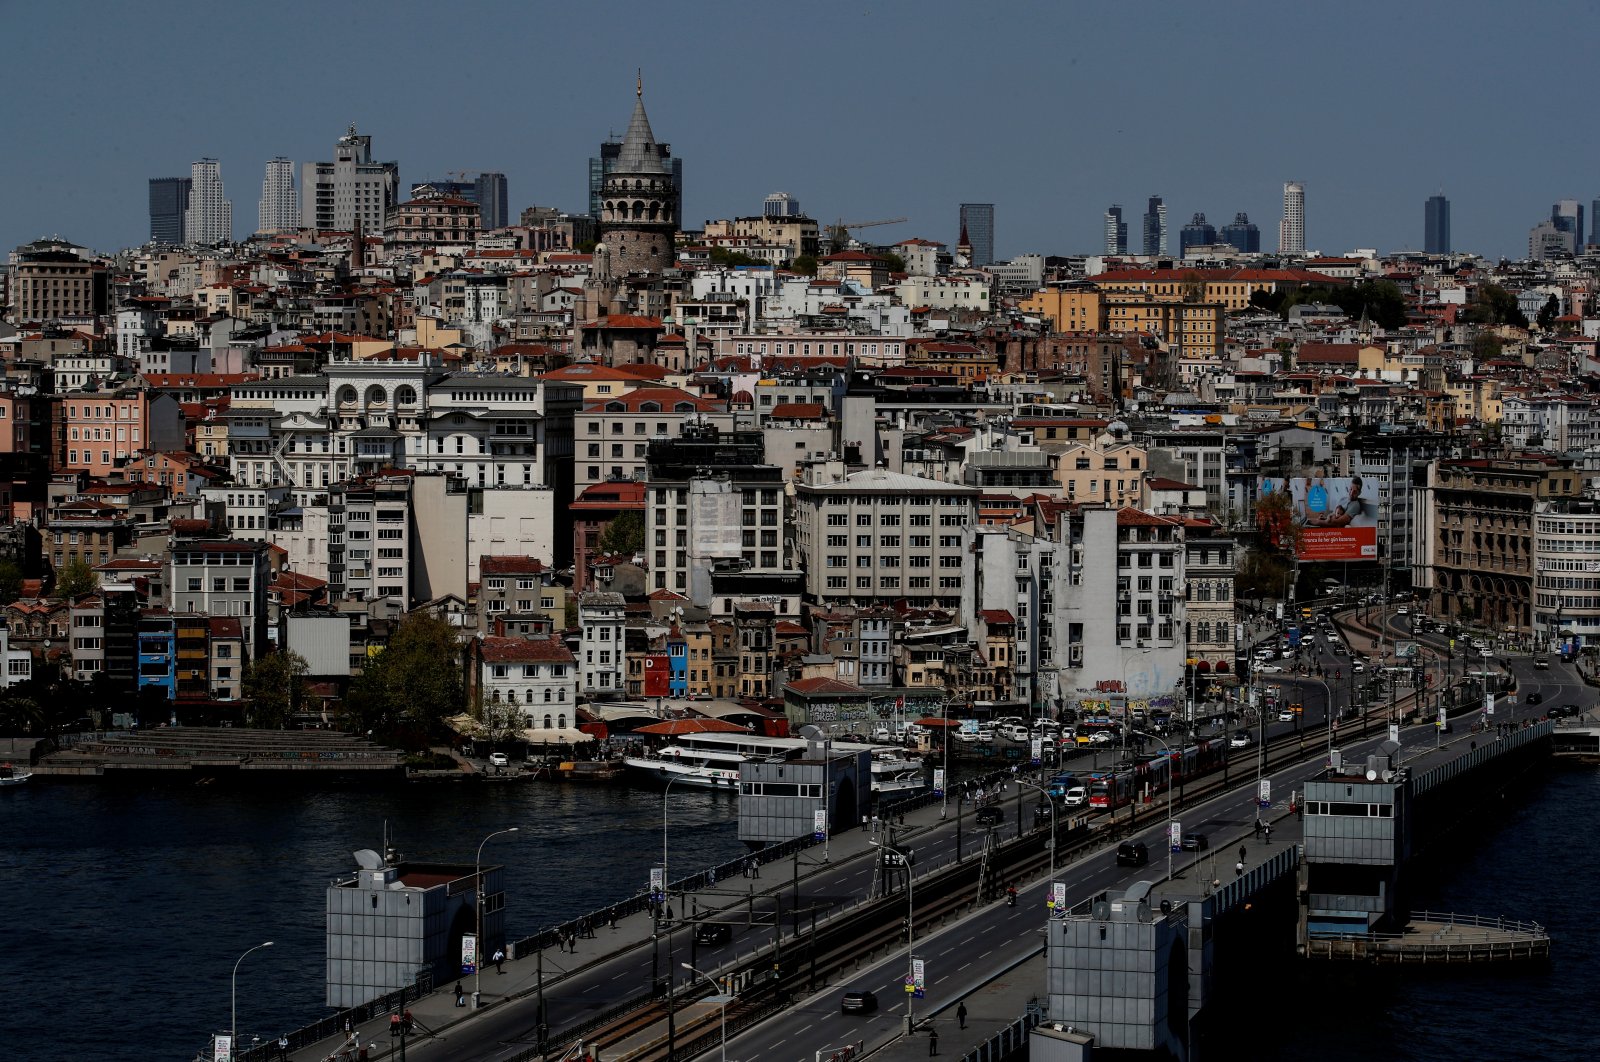 Galata Bridge, historical Galata Tower, and residential areas are pictured in Istanbul, Türkiye, April 27, 2020. (Reuters File Photo)